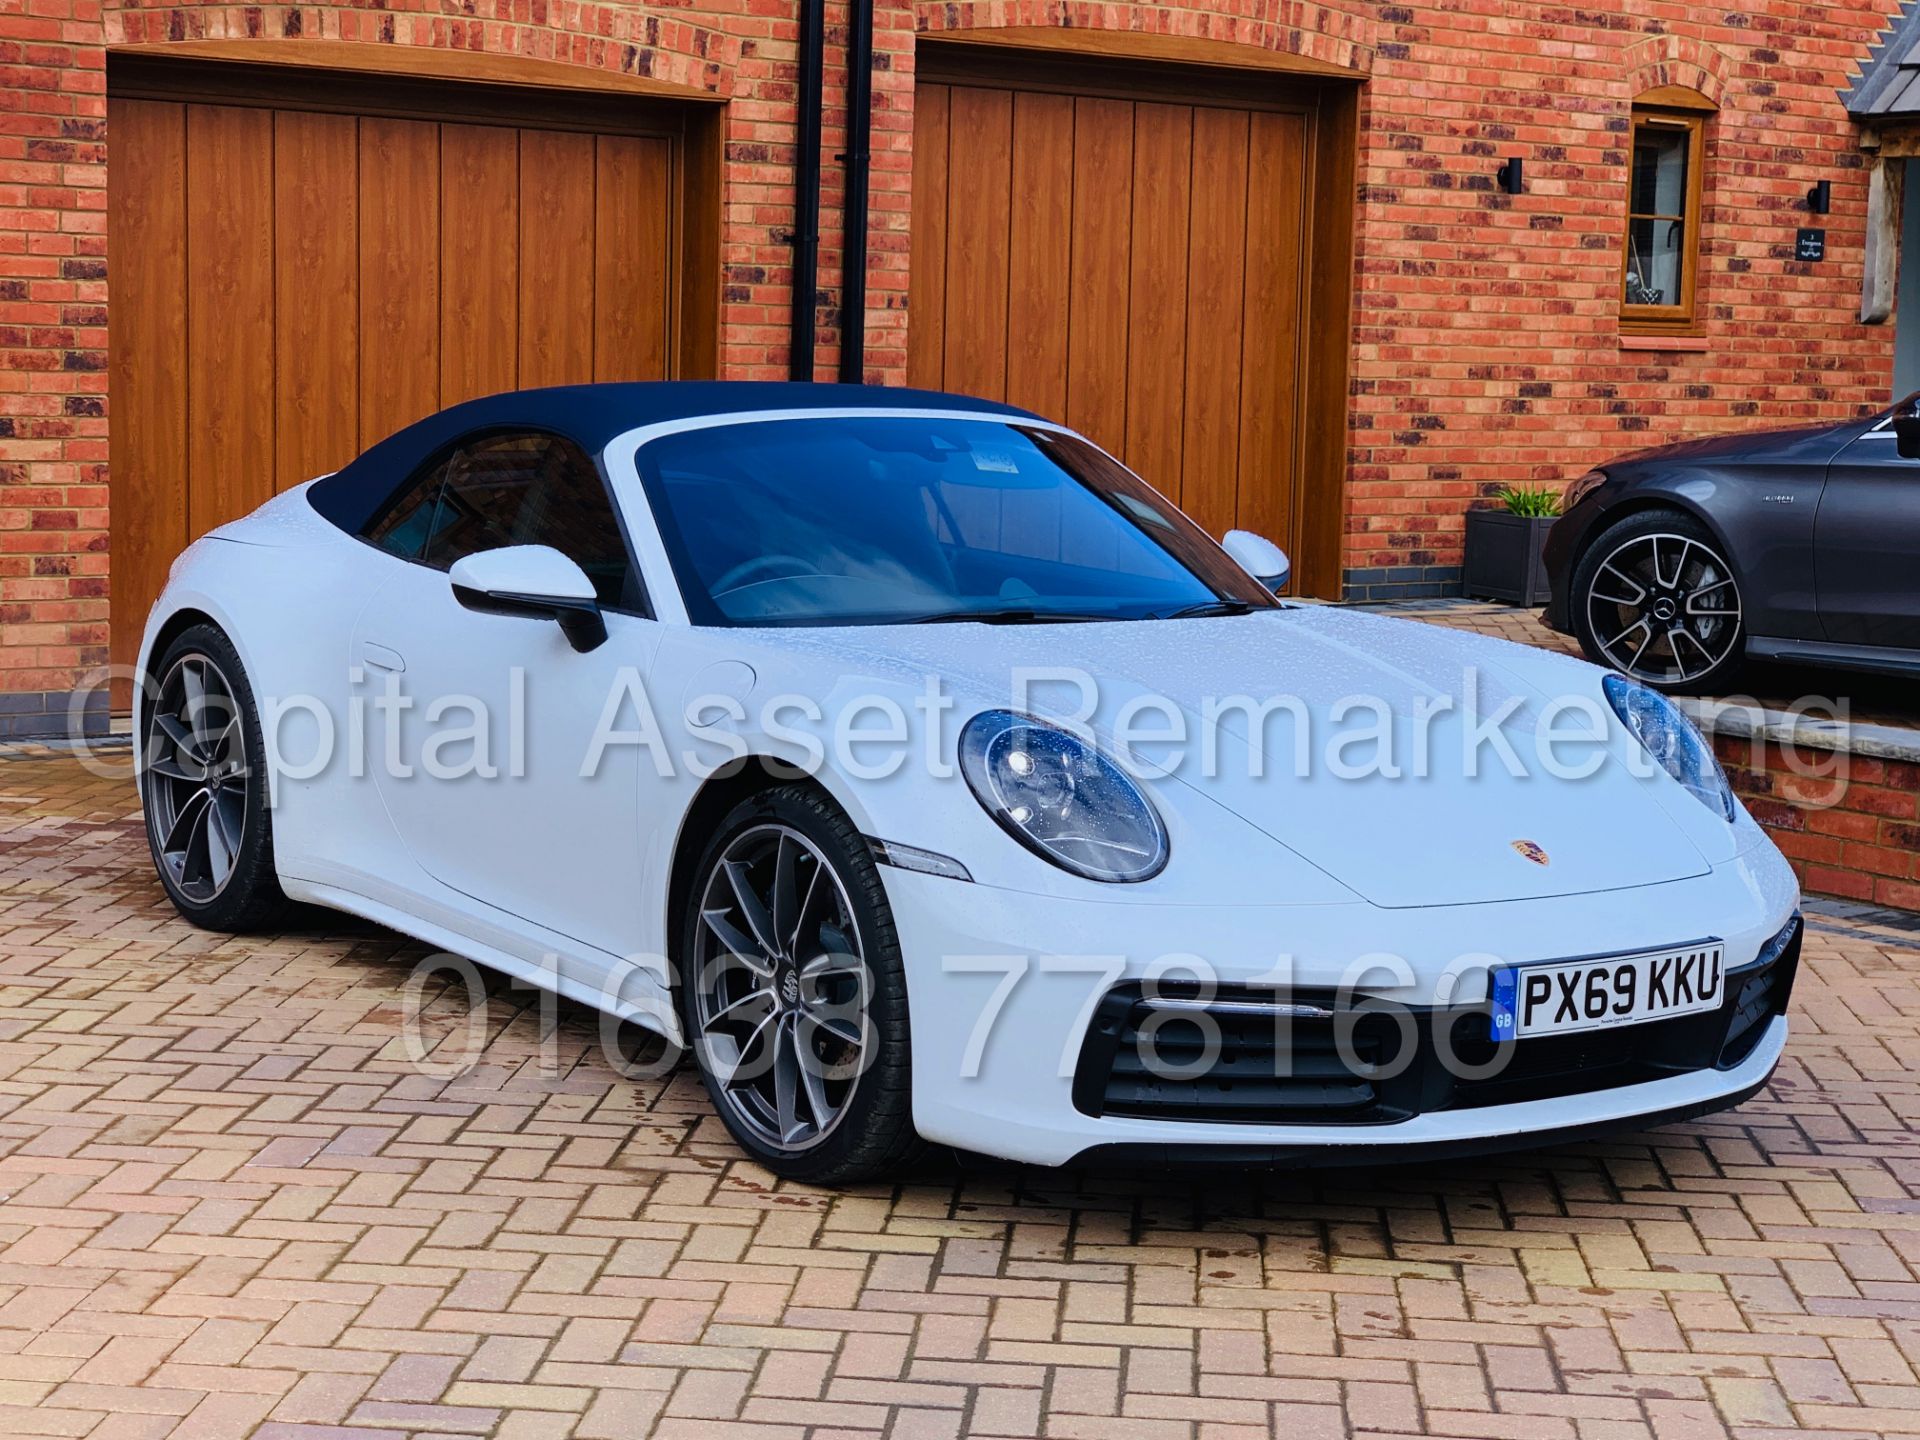 On Sale PORSCHE 911 CARRERA S-A *CABRIOLET* (2020 - NEW 992 MODEL) AUTO -SAT NAV - CHRONO PACK *WOW* - Image 25 of 82